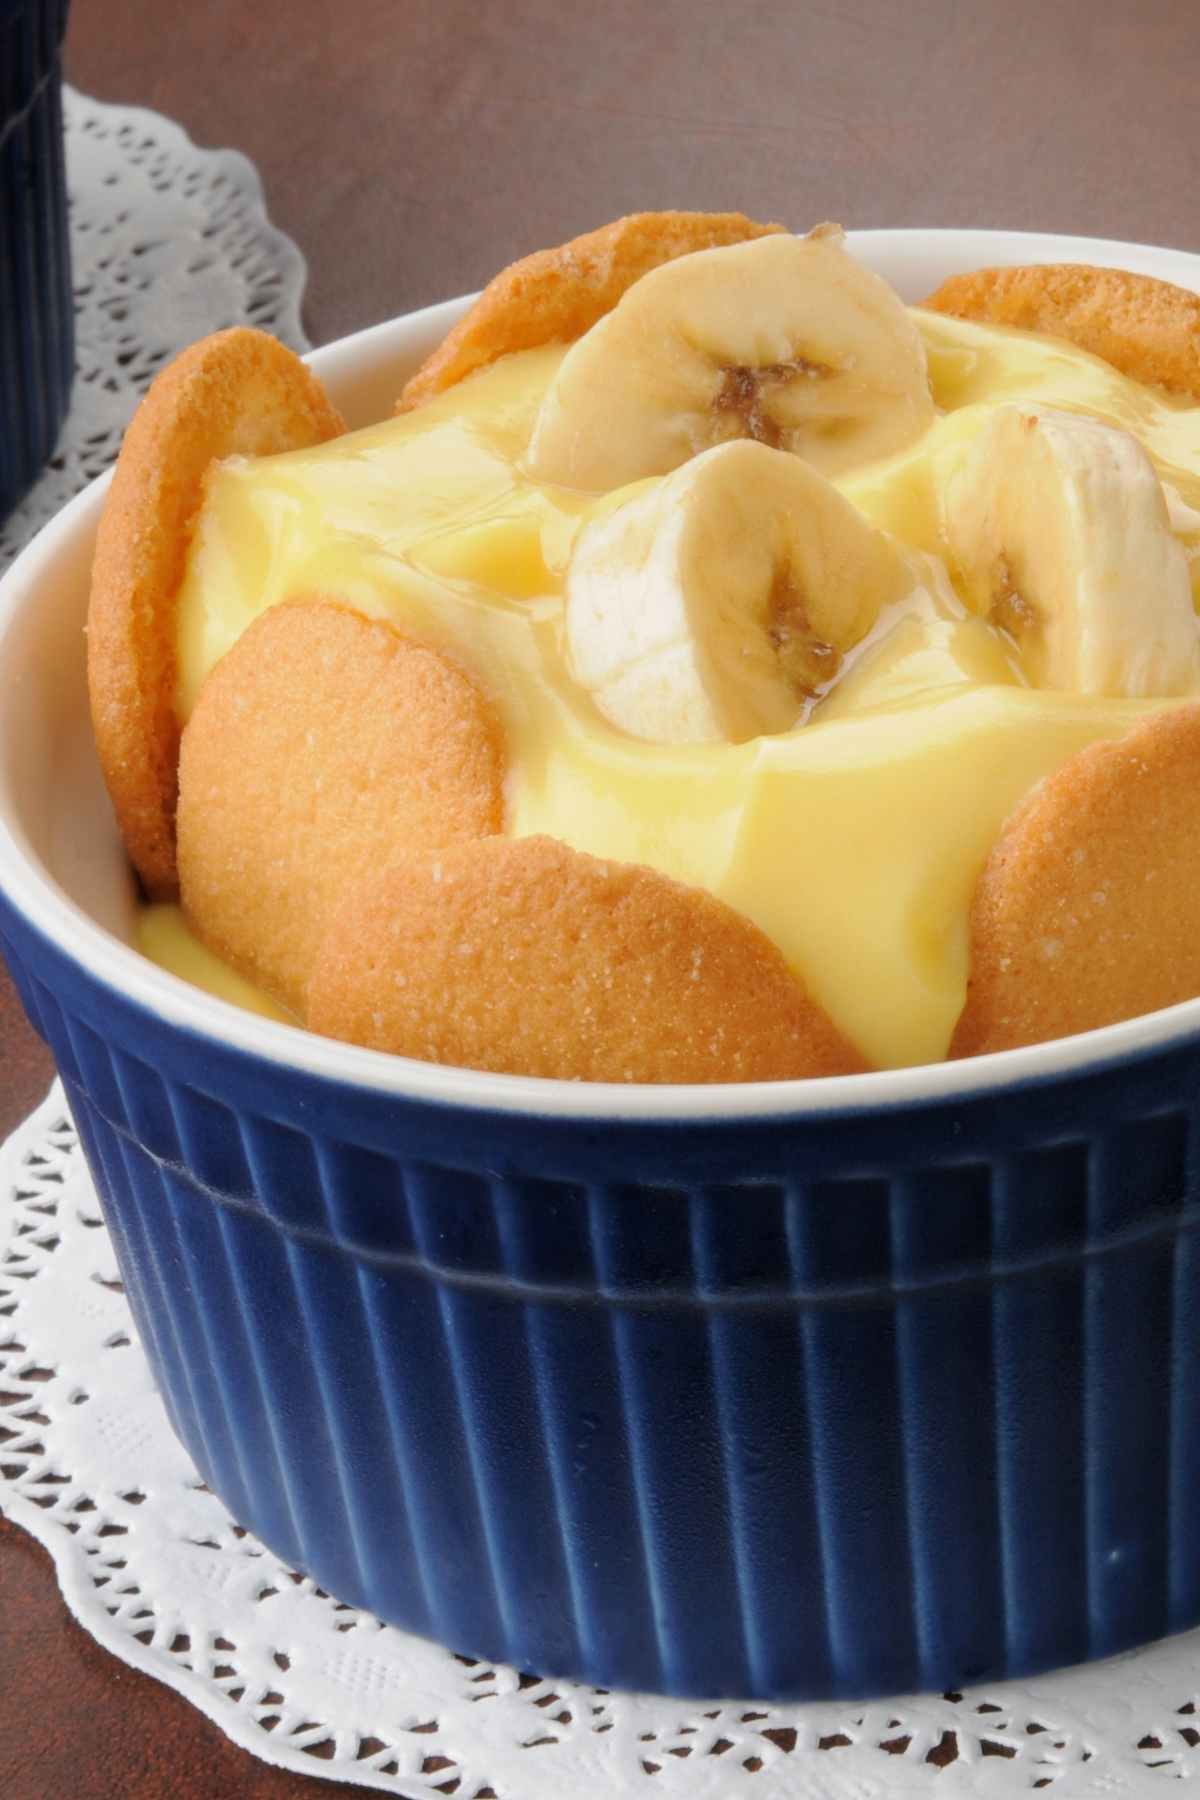 This sweet and creamy banana pudding takes just 25 minutes to make. It features ripe bananas, instant vanilla pudding, and sweetened condensed milk!